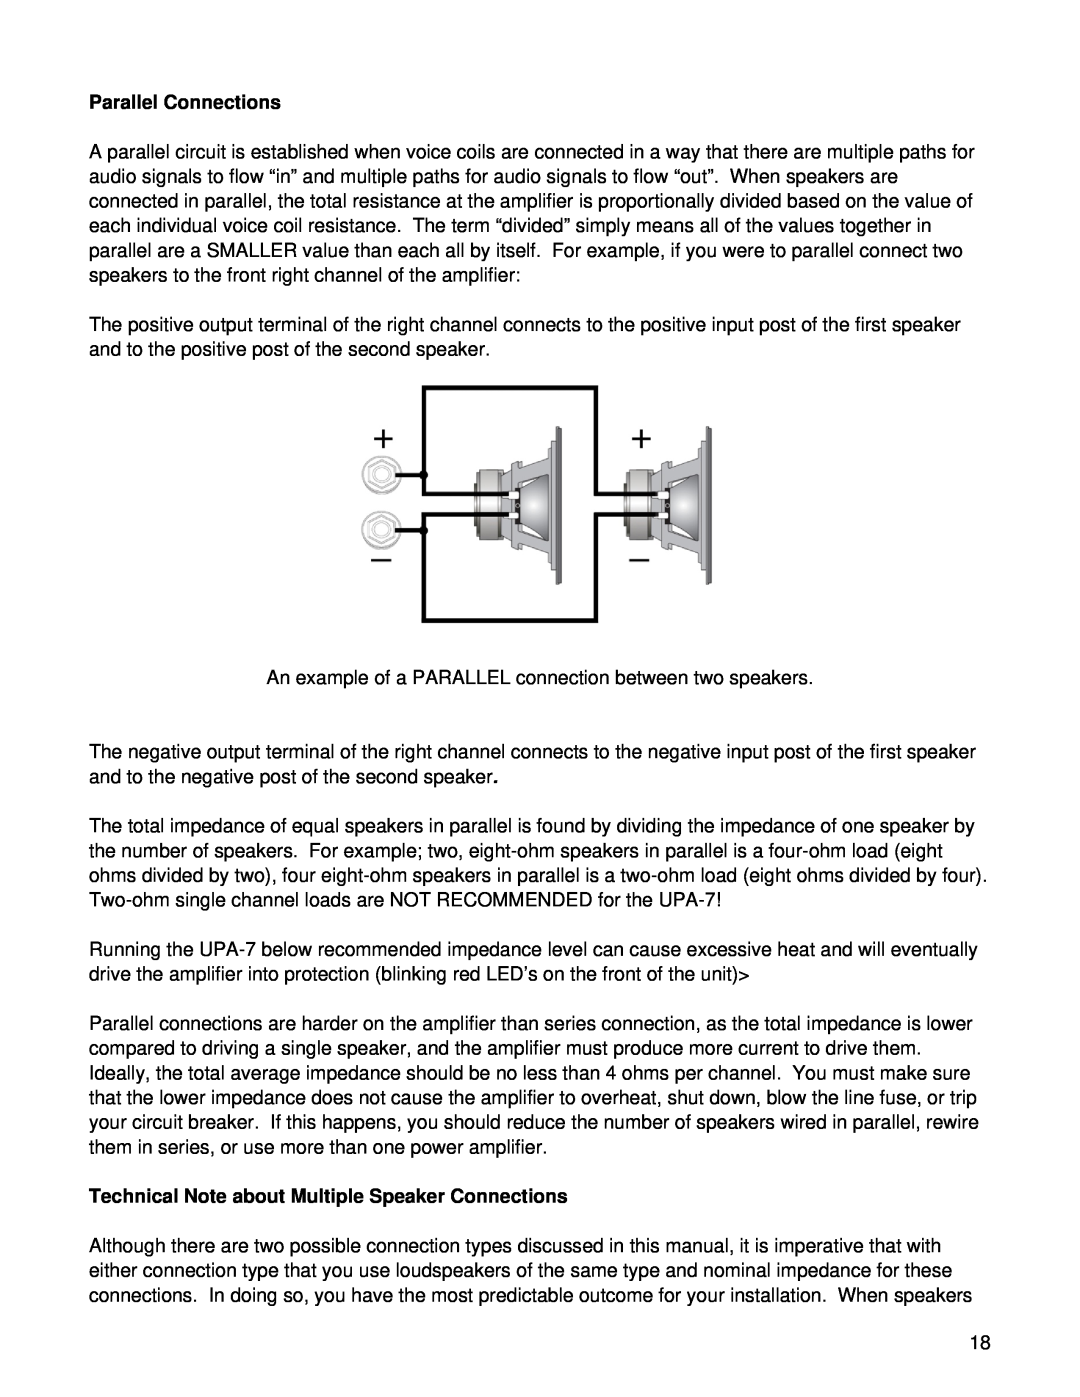 Emotiva UPA-7 manual Parallel Connections, Technical Note about Multiple Speaker Connections 